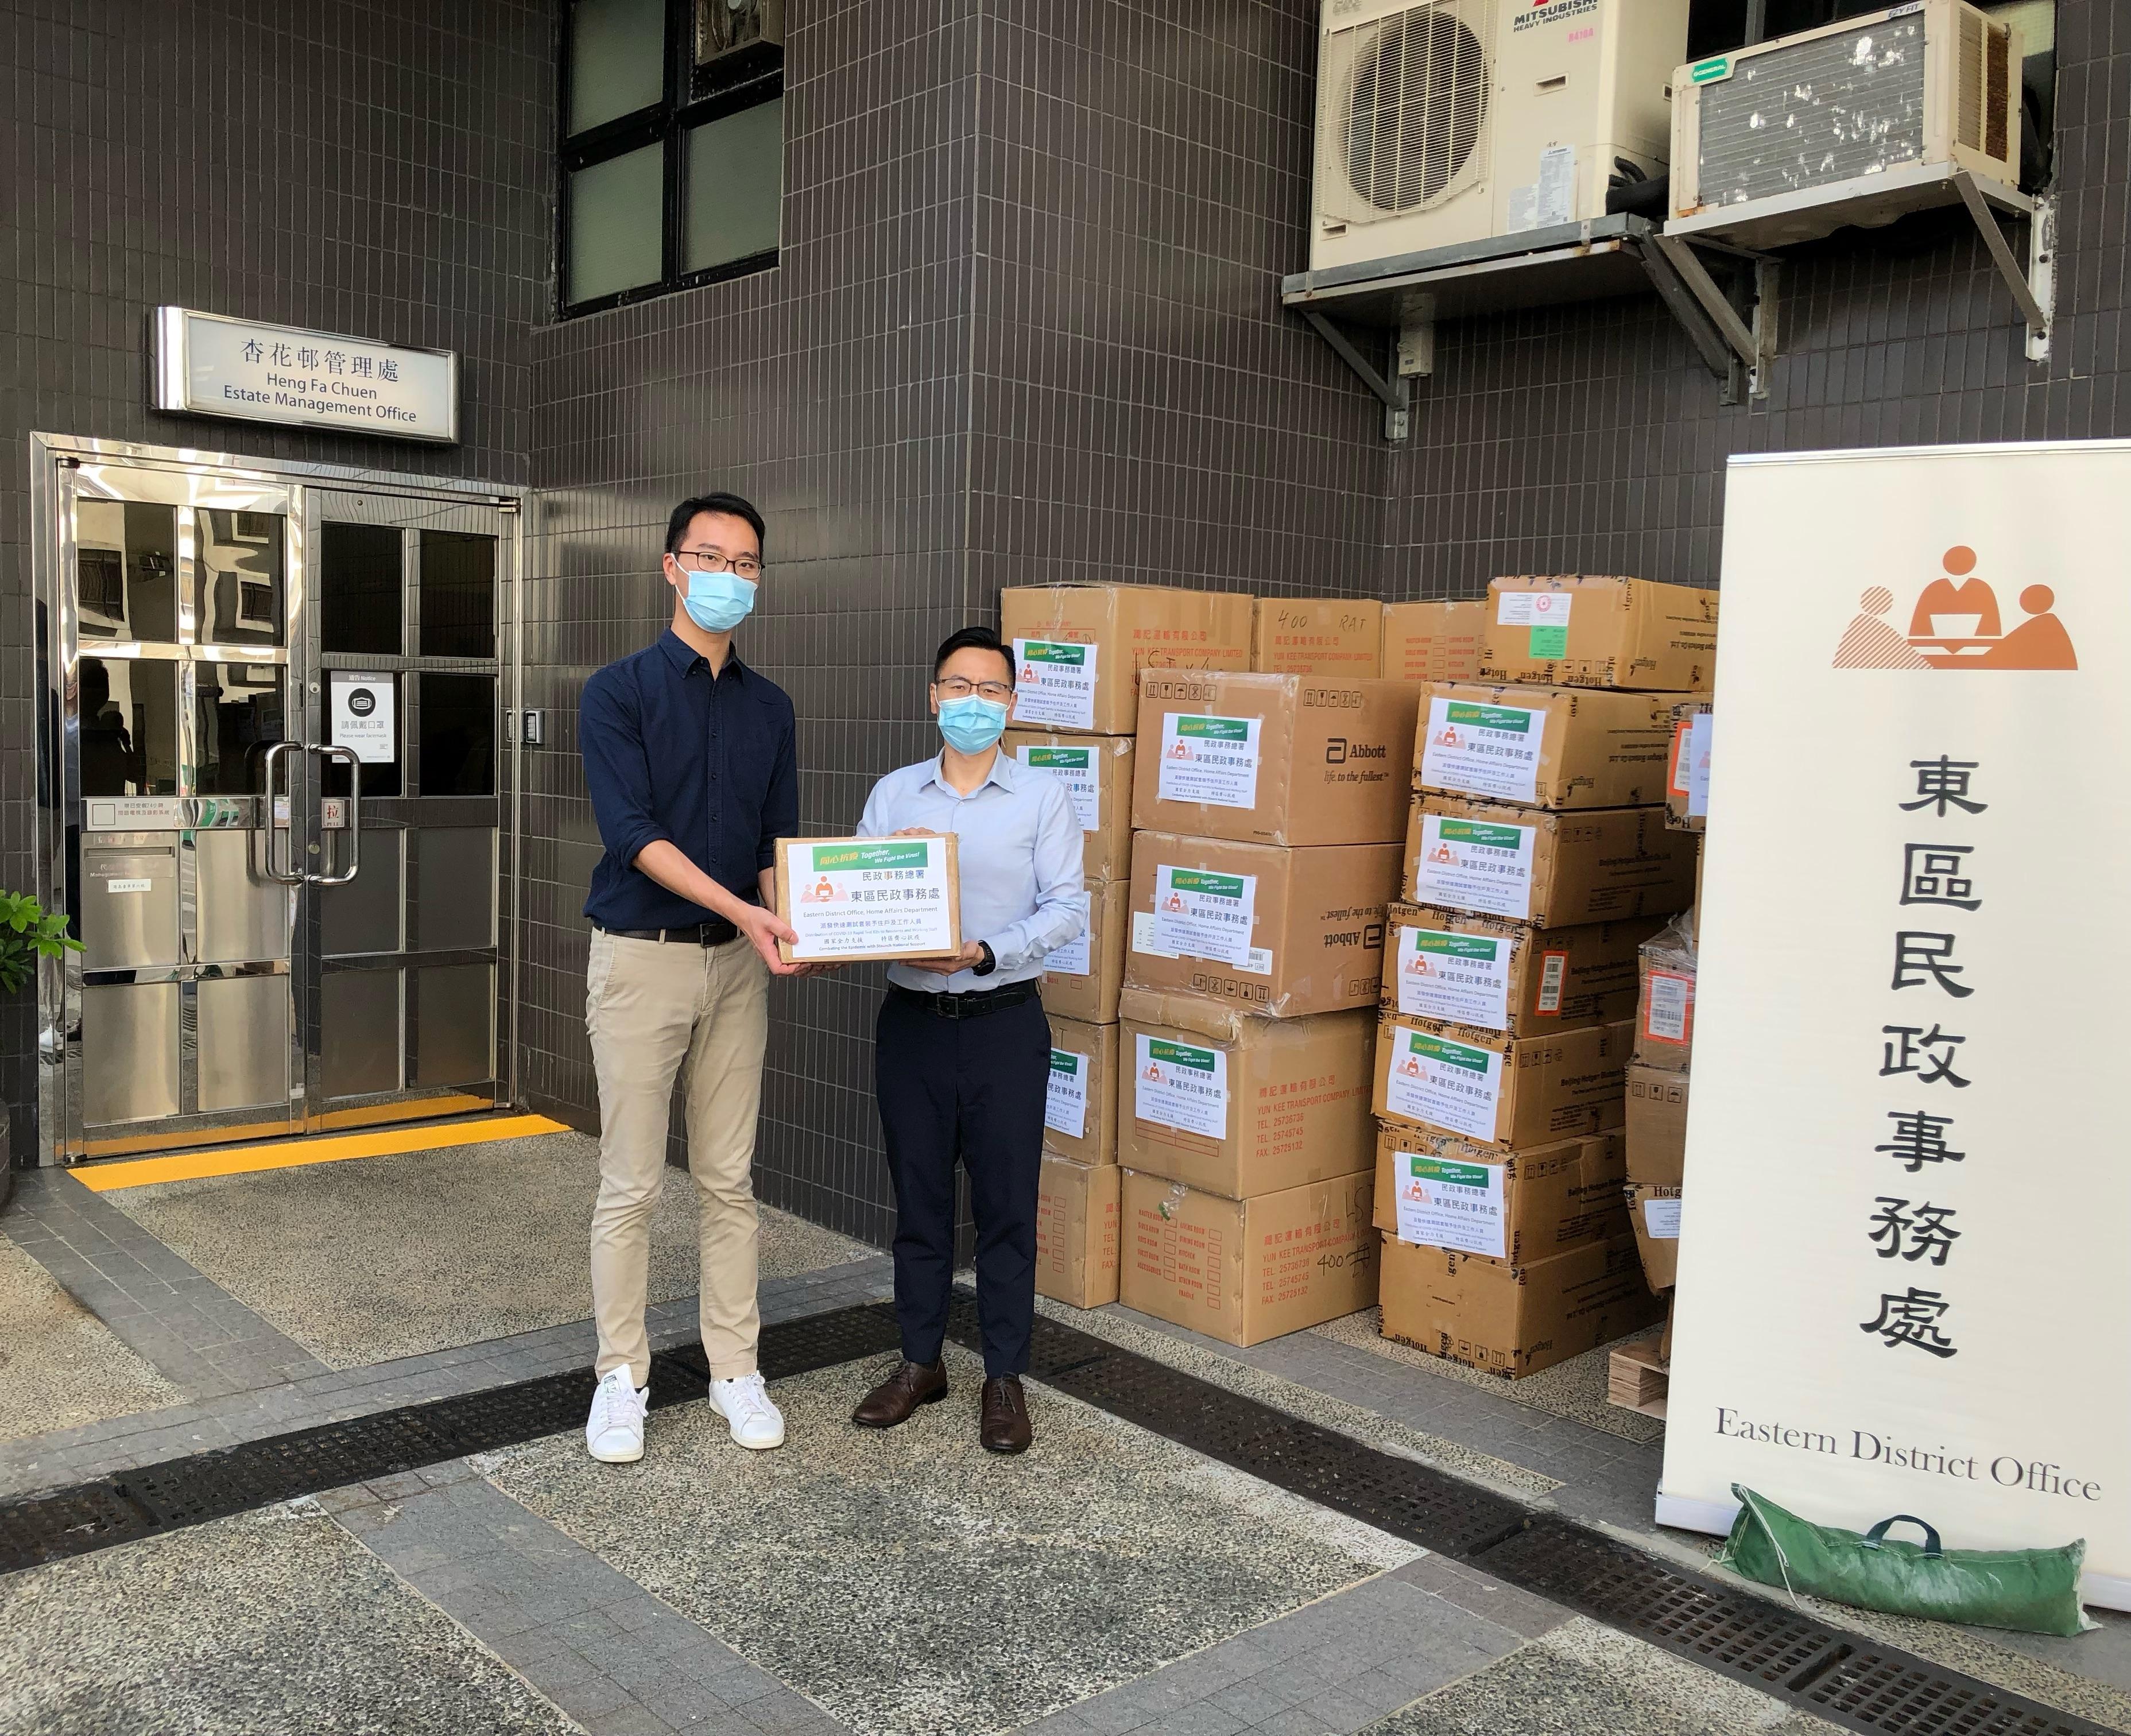 The Eastern District Office today (April 30) distributed COVID-19 rapid test kits to households, cleansing workers and property management staff living and working in Heng Fa Chuen for voluntary testing through the property management company.